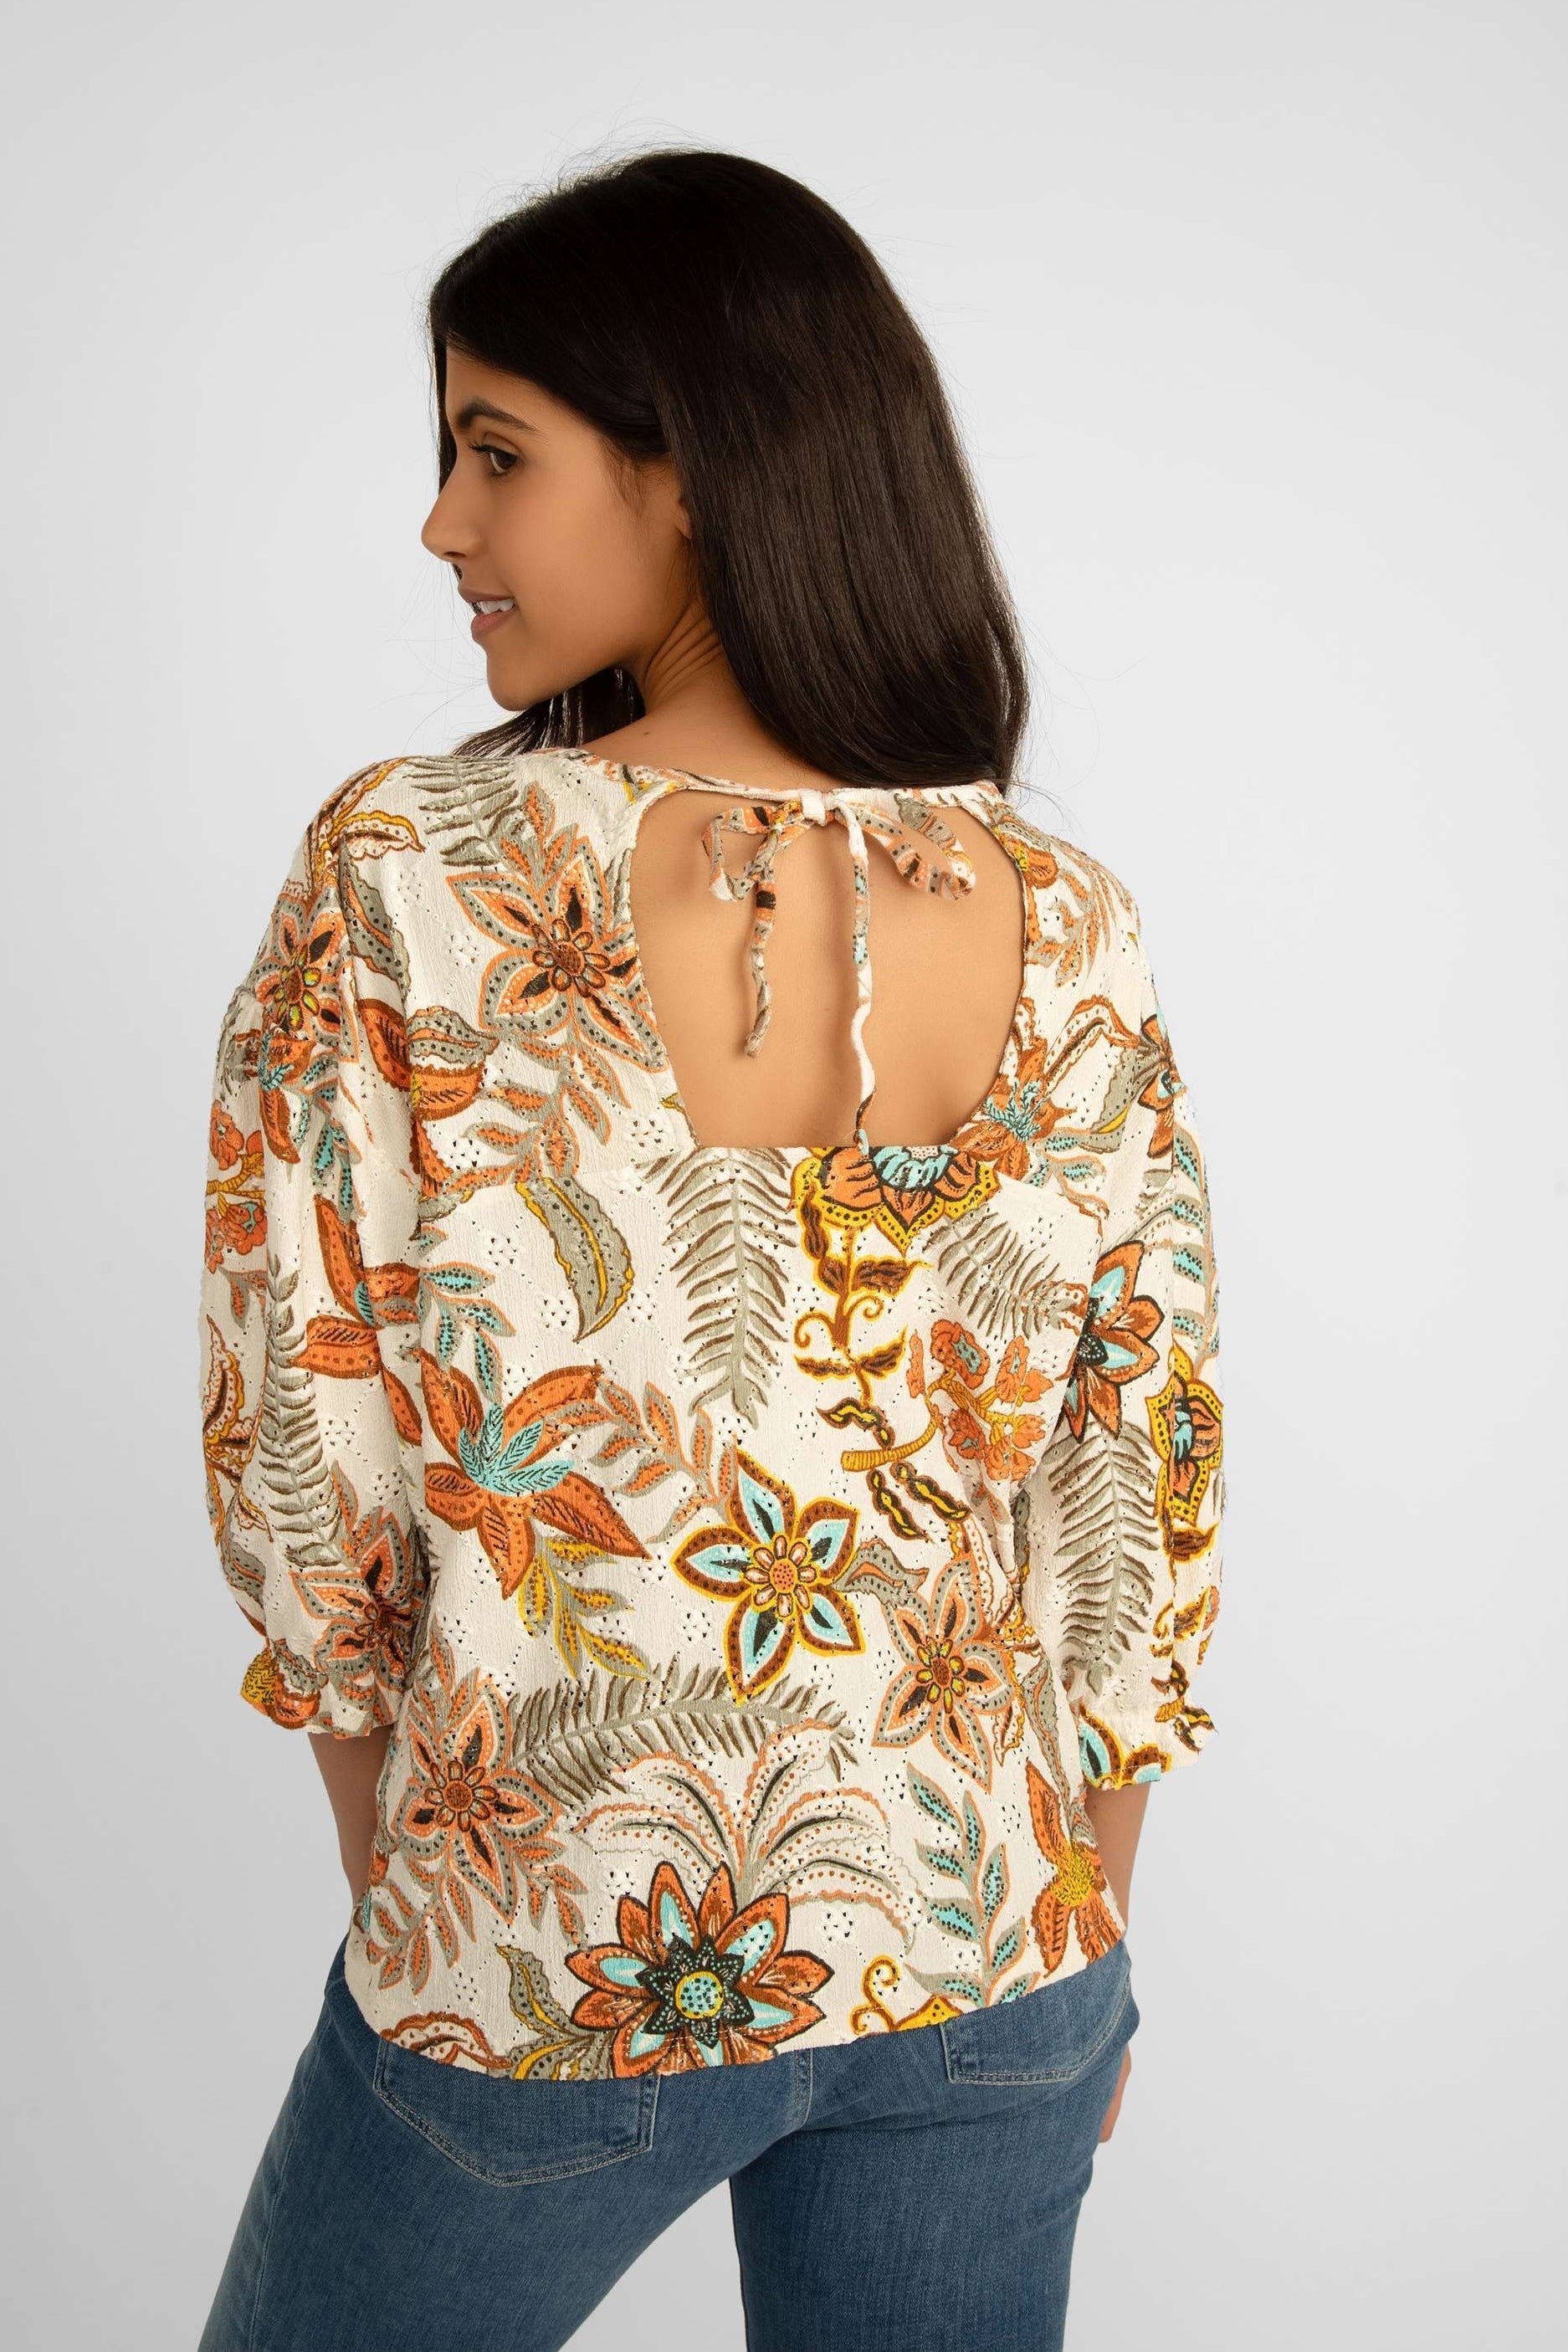 Back view of Garcia (Q40007) Women's Elbow Puff Sleeve Top with Back Cutoff in Retro Orange Floral Print